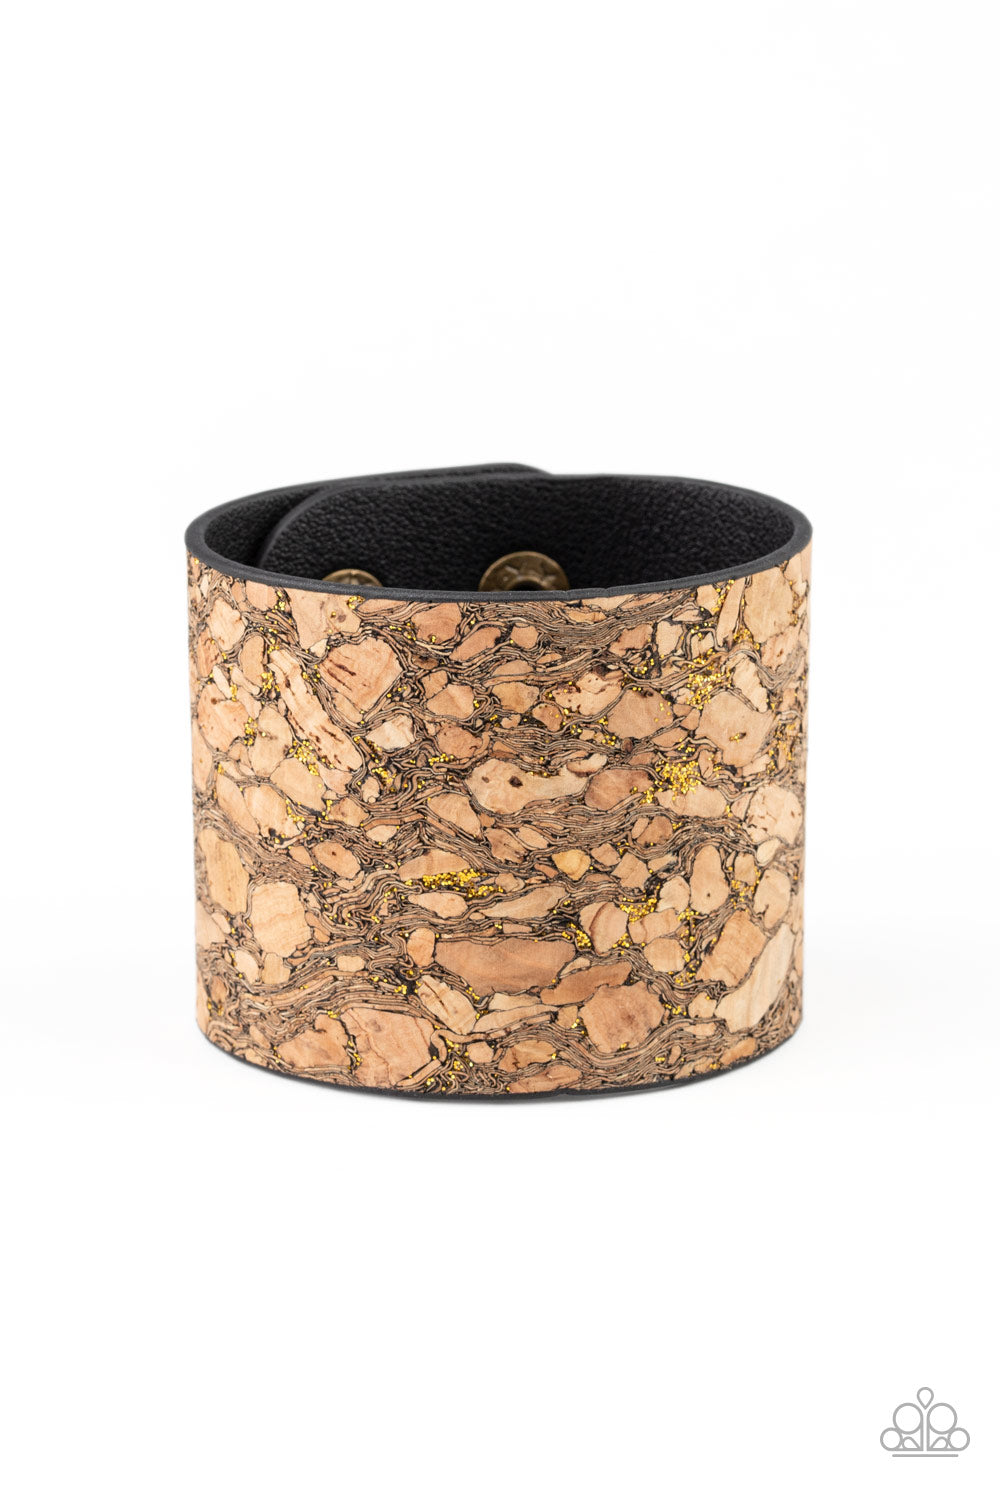 Cork Congo - Brass and Cork Bracelet - Paparazzi Accessories - Pieces of cork have been plastered across the front of a black leather band, creating an earthy look around the wrist. Specks of glittery brass accents are sprinkled across the front for a flashy finish. Features an adjustable snap closure. Sold as one individual bracelet.